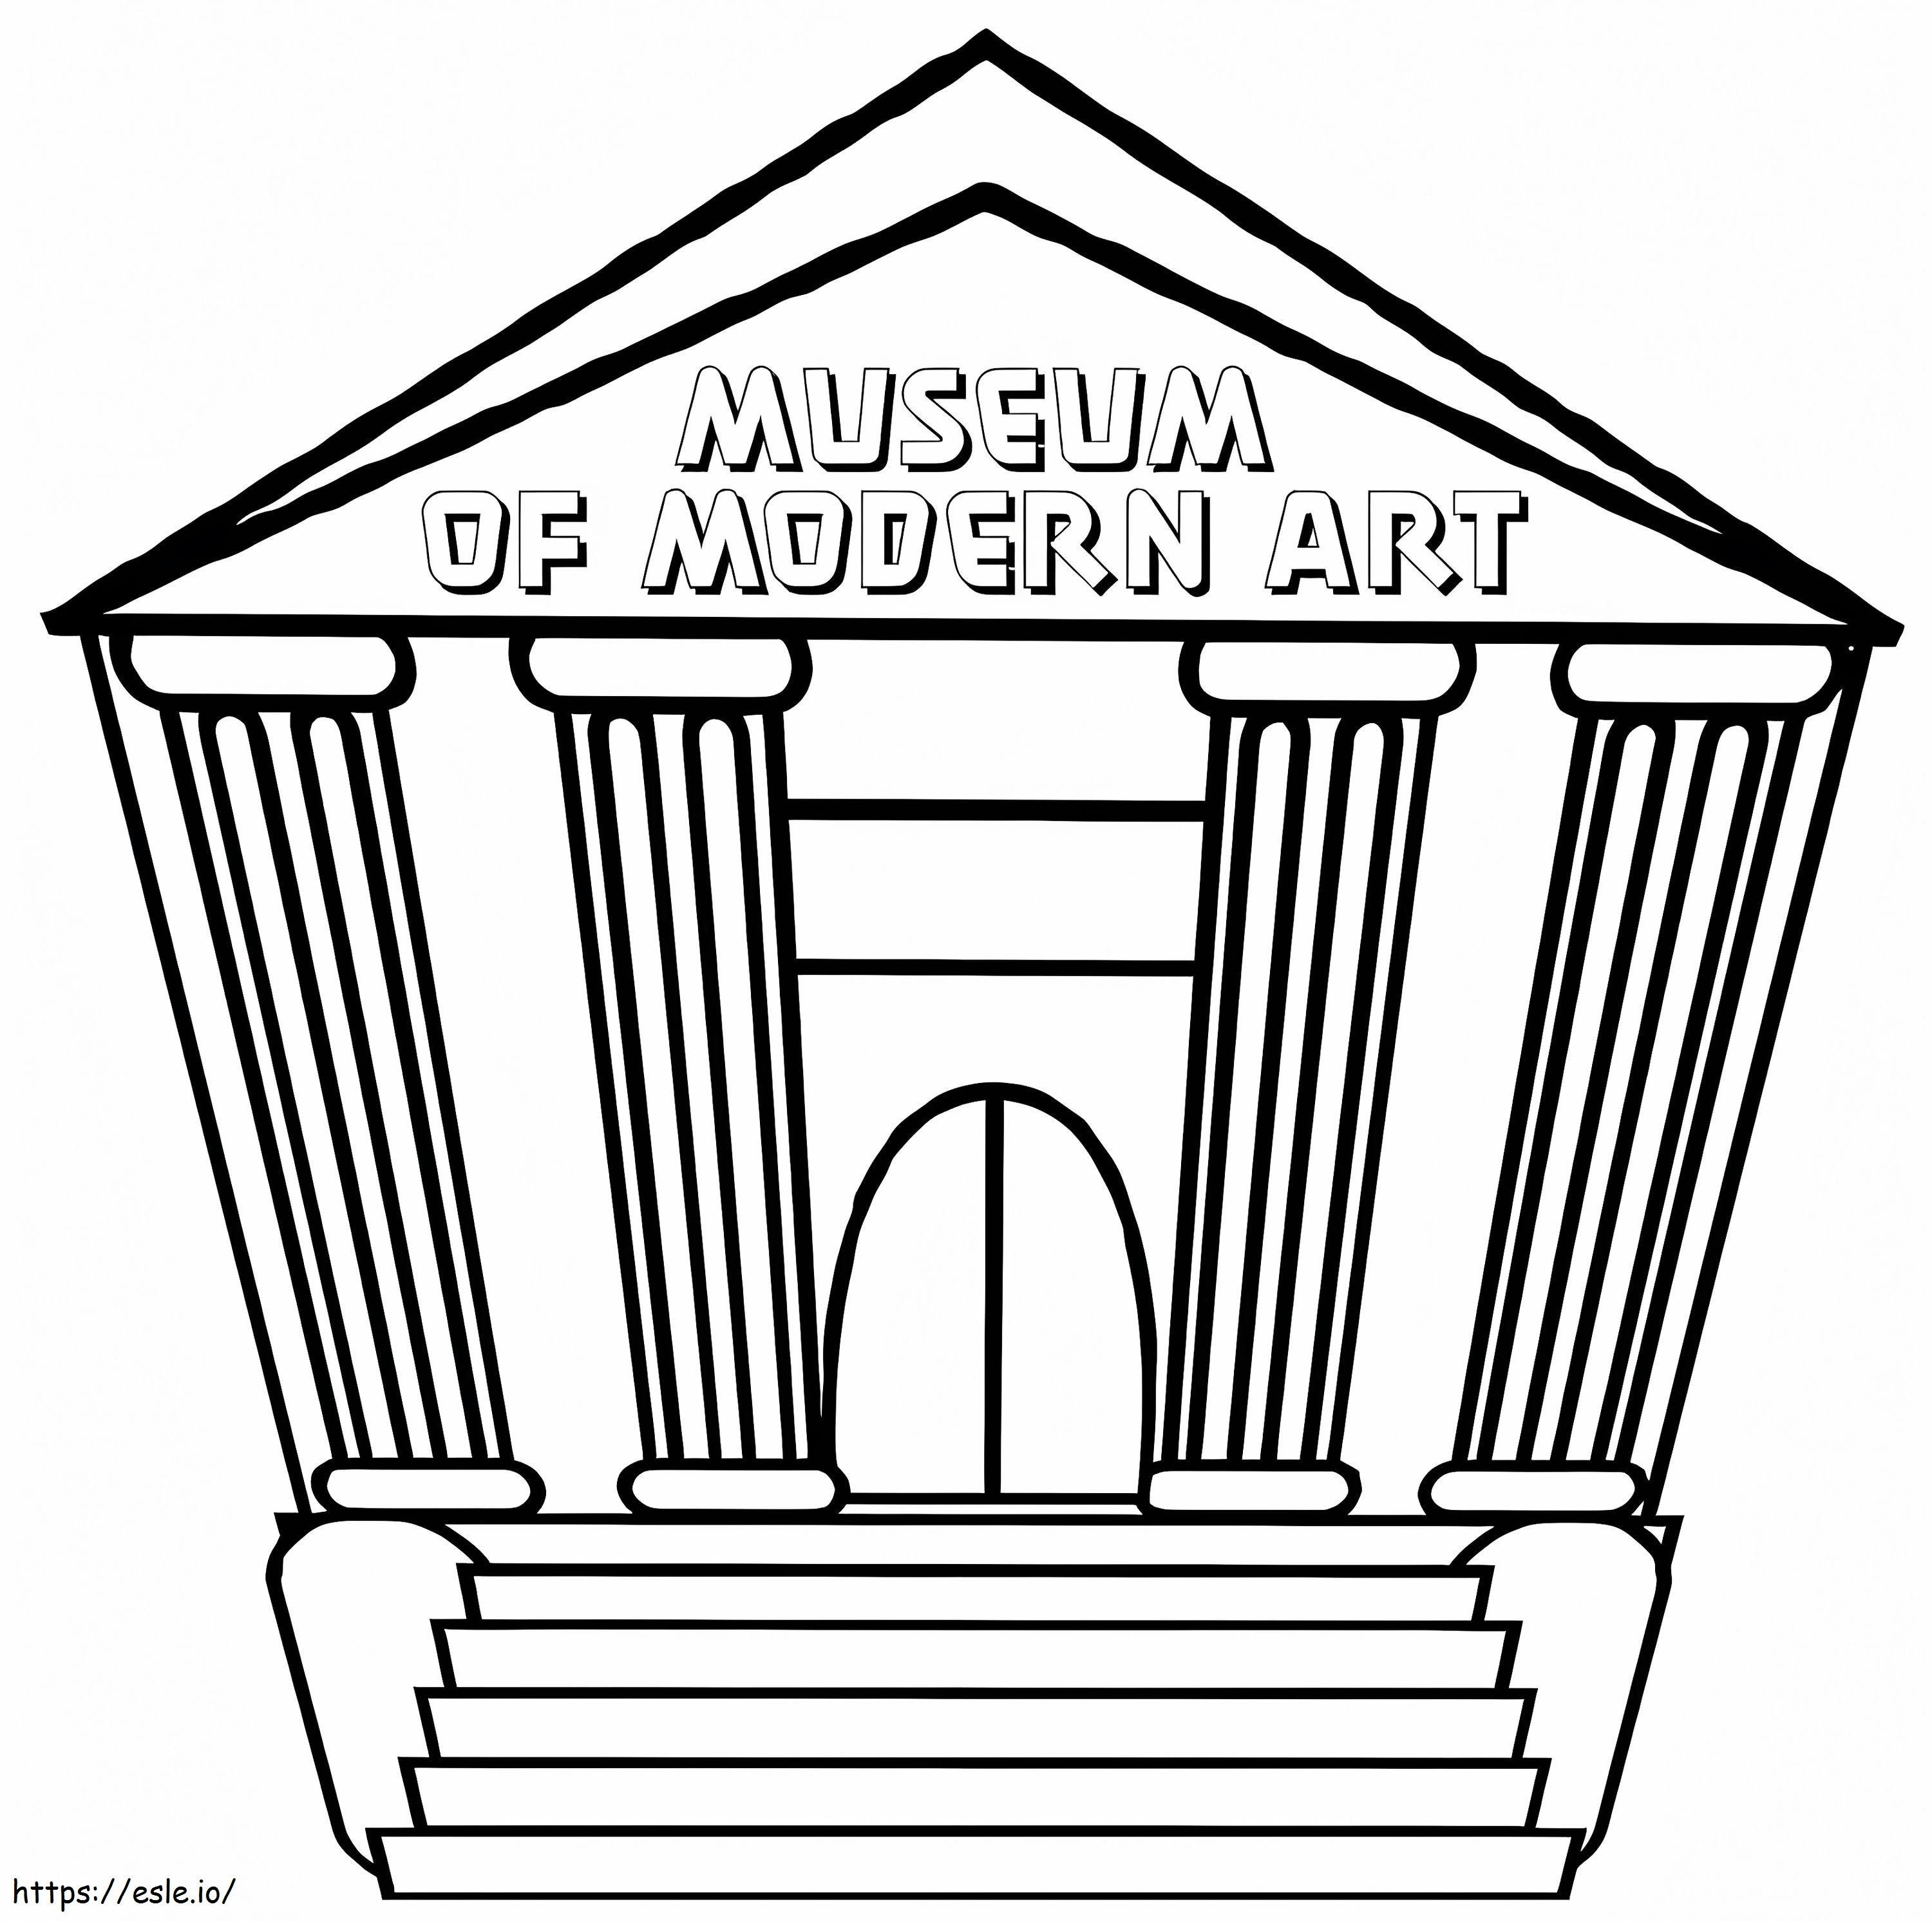 Modern Art Museum coloring page